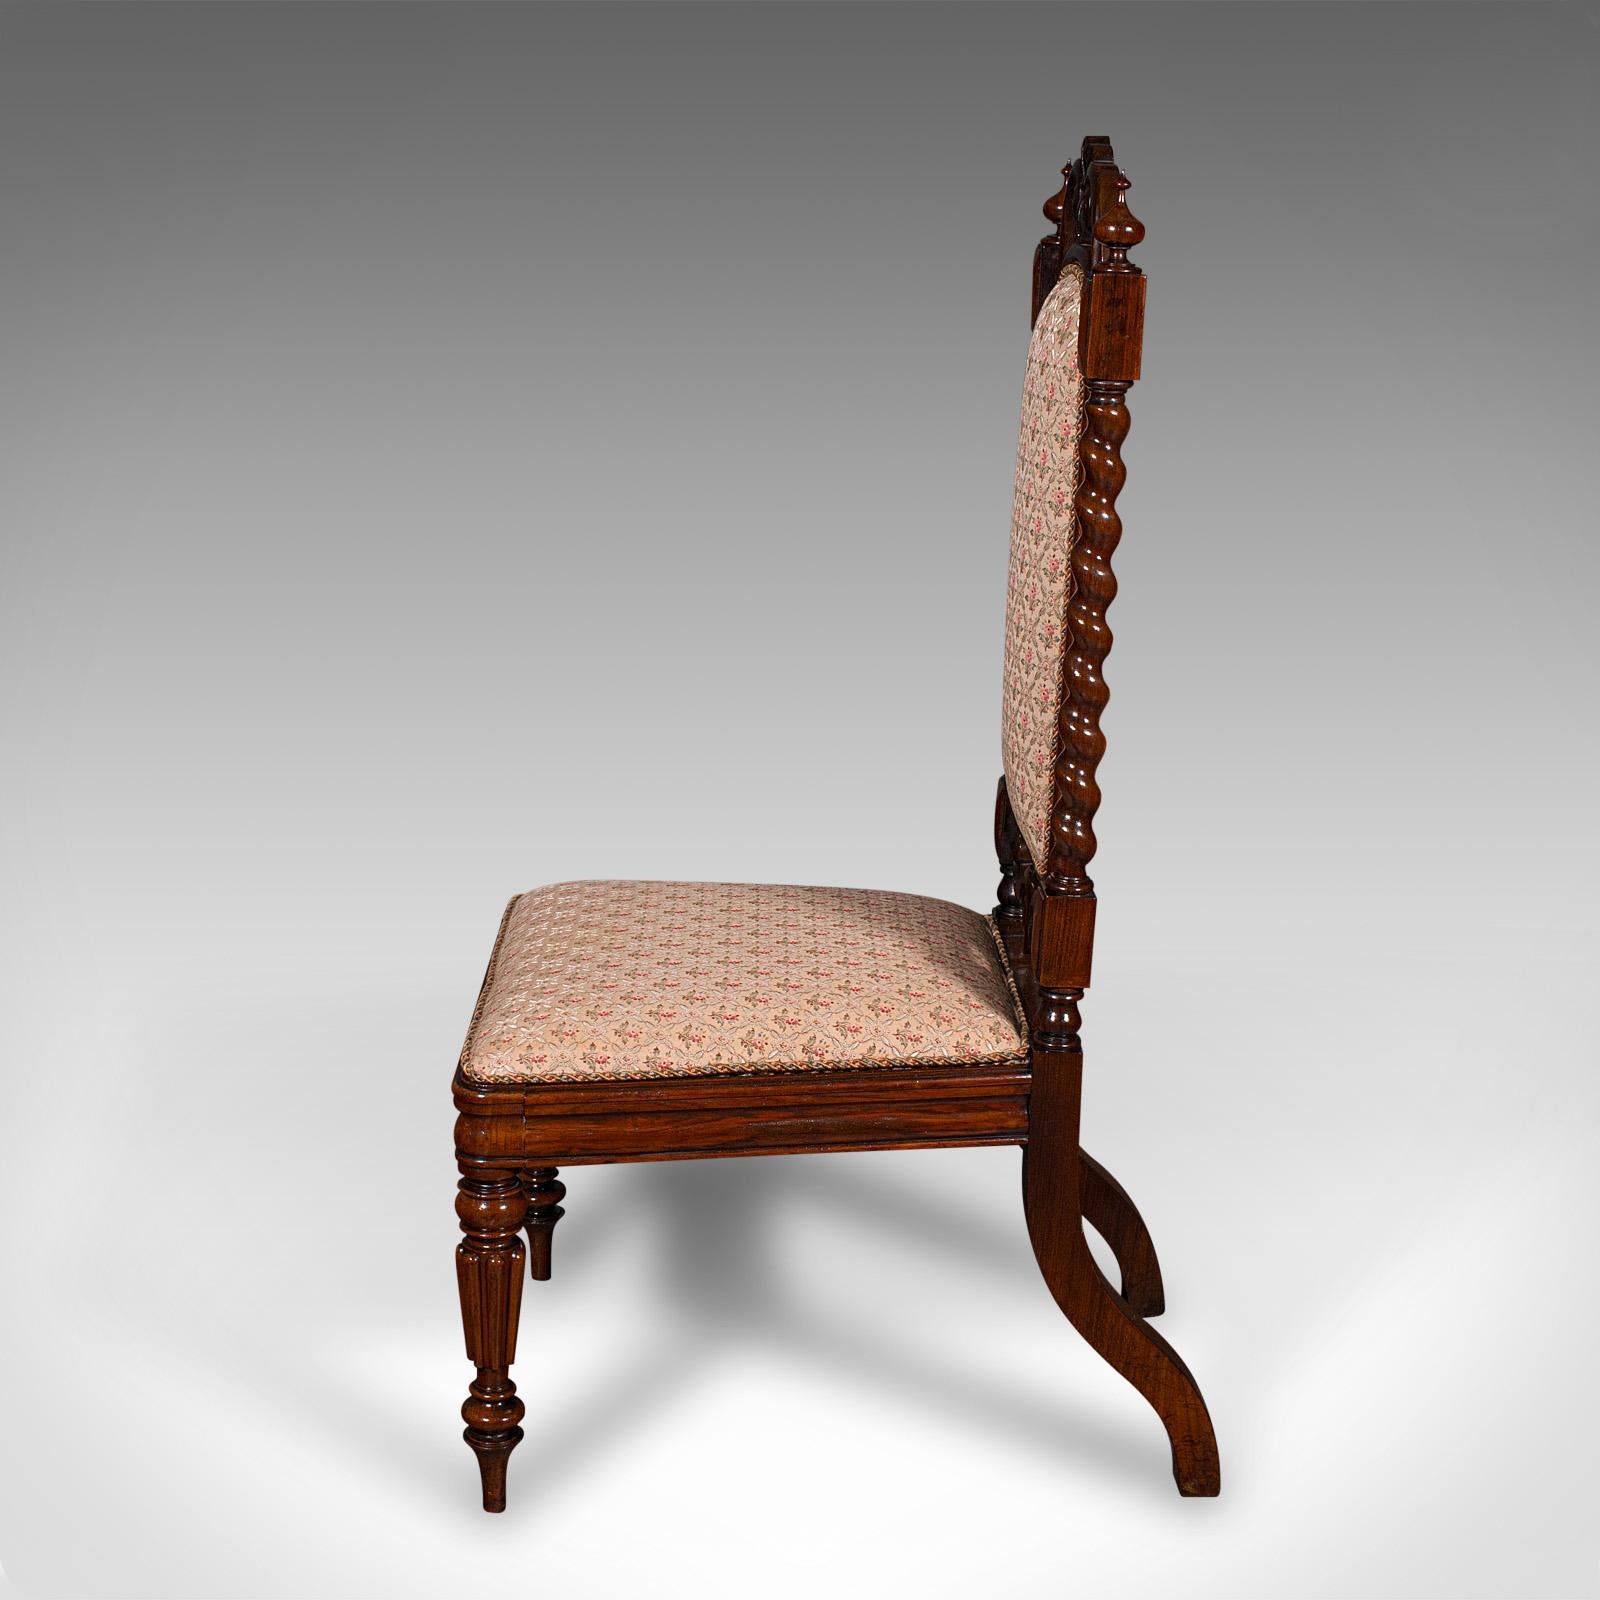 Antique Morning Room Chair, English, Silk Cotton, Side Seat, William IV, C.1835 In Good Condition For Sale In Hele, Devon, GB